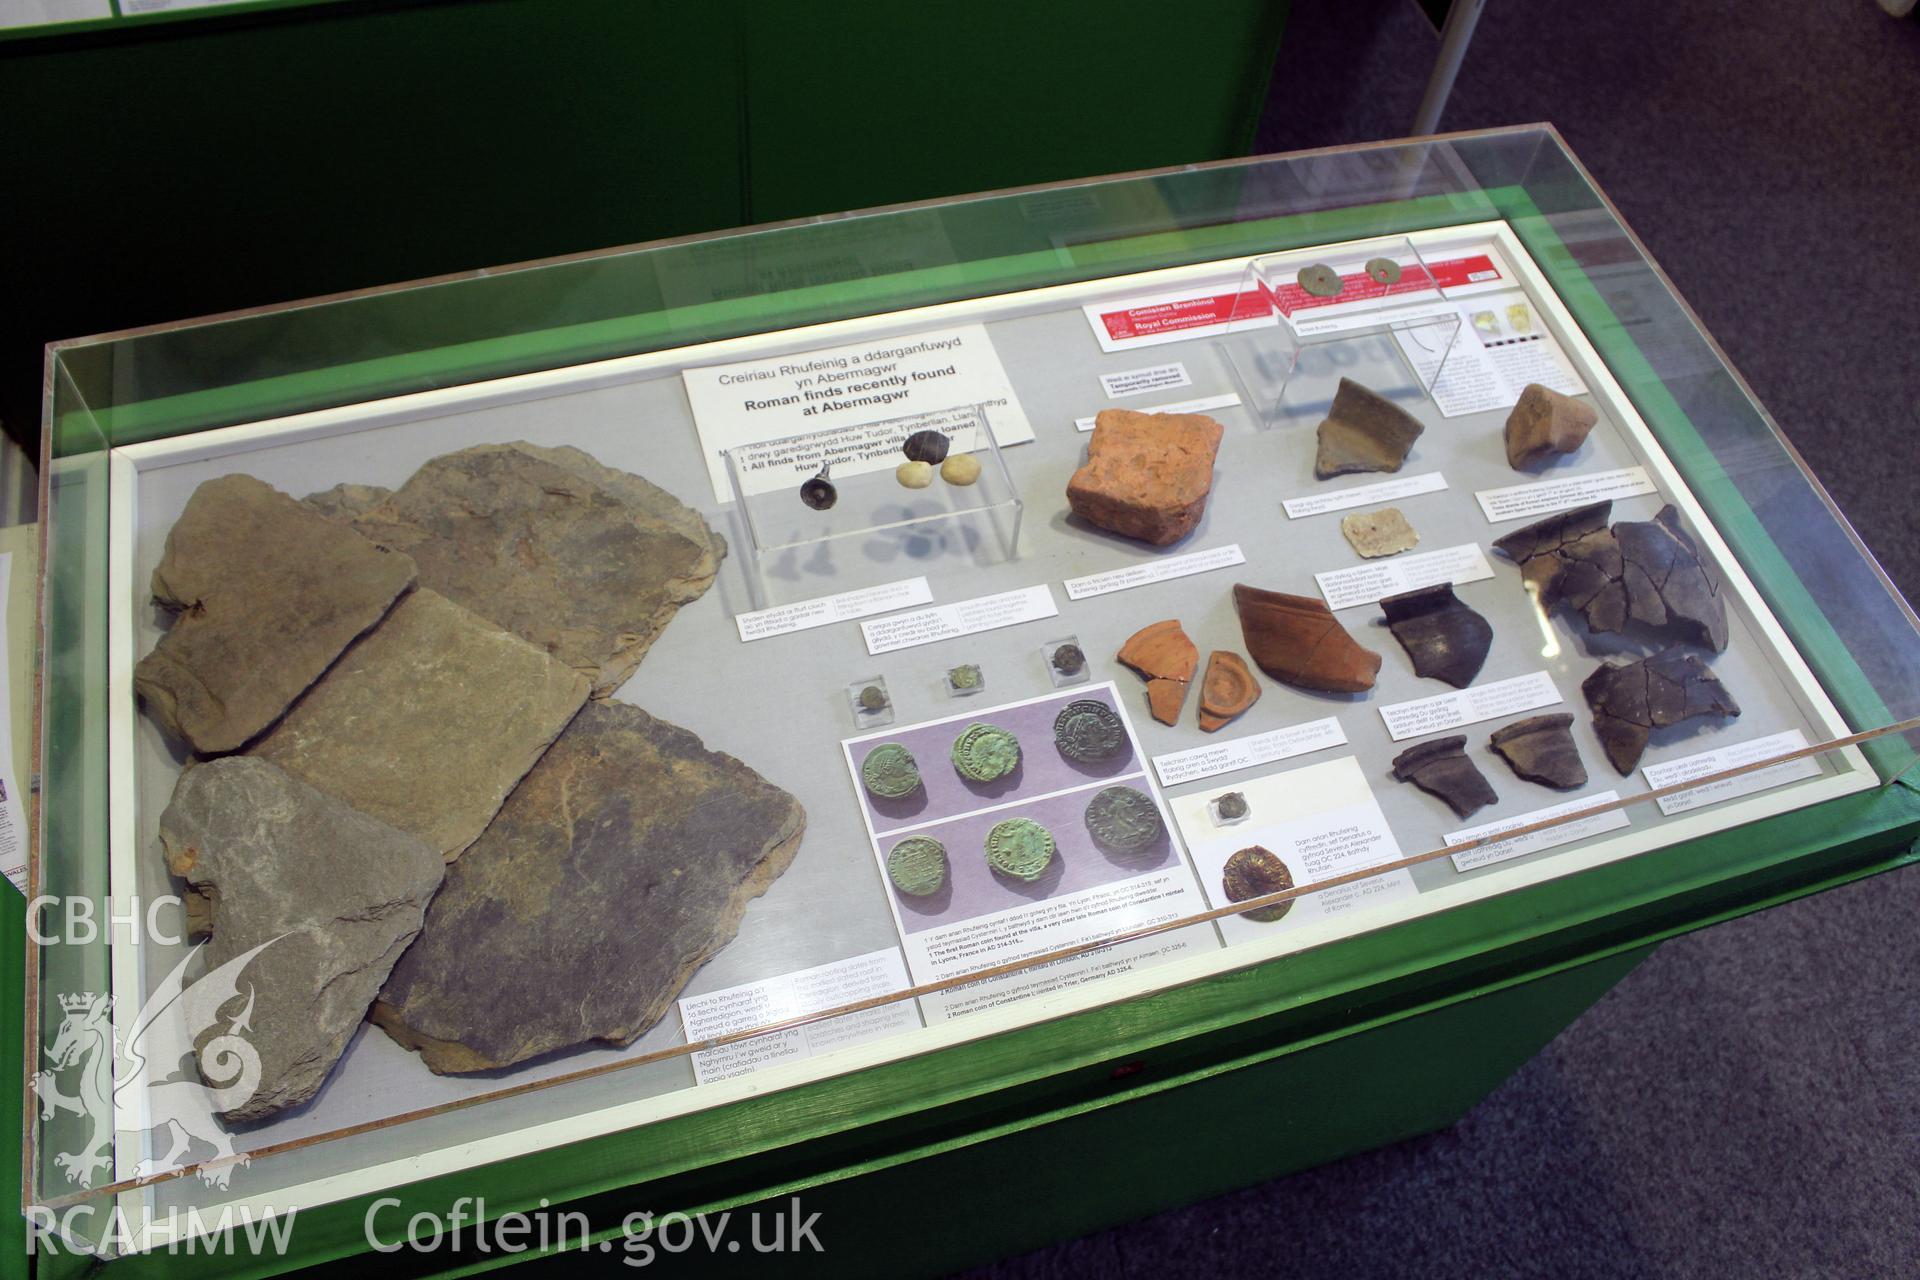 Photographs of new display of Roman finds from Abermagwr Roman Villa in Amgueddfa Ceredigion Museum, May 2015